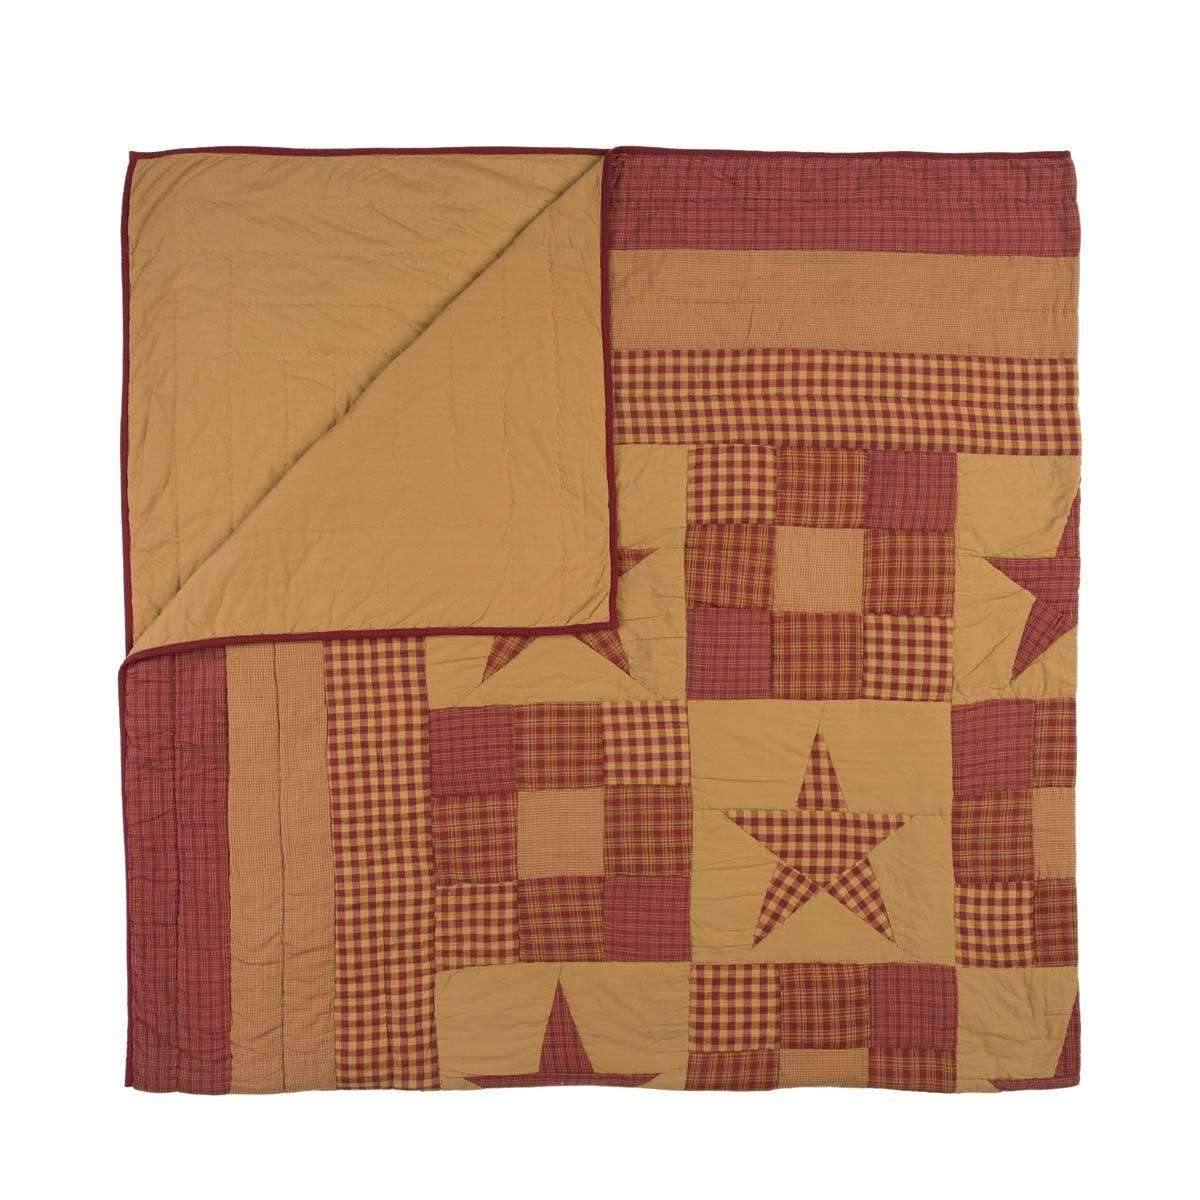 Ninepatch Star King Quilt 105Wx95L VHC Brands folded